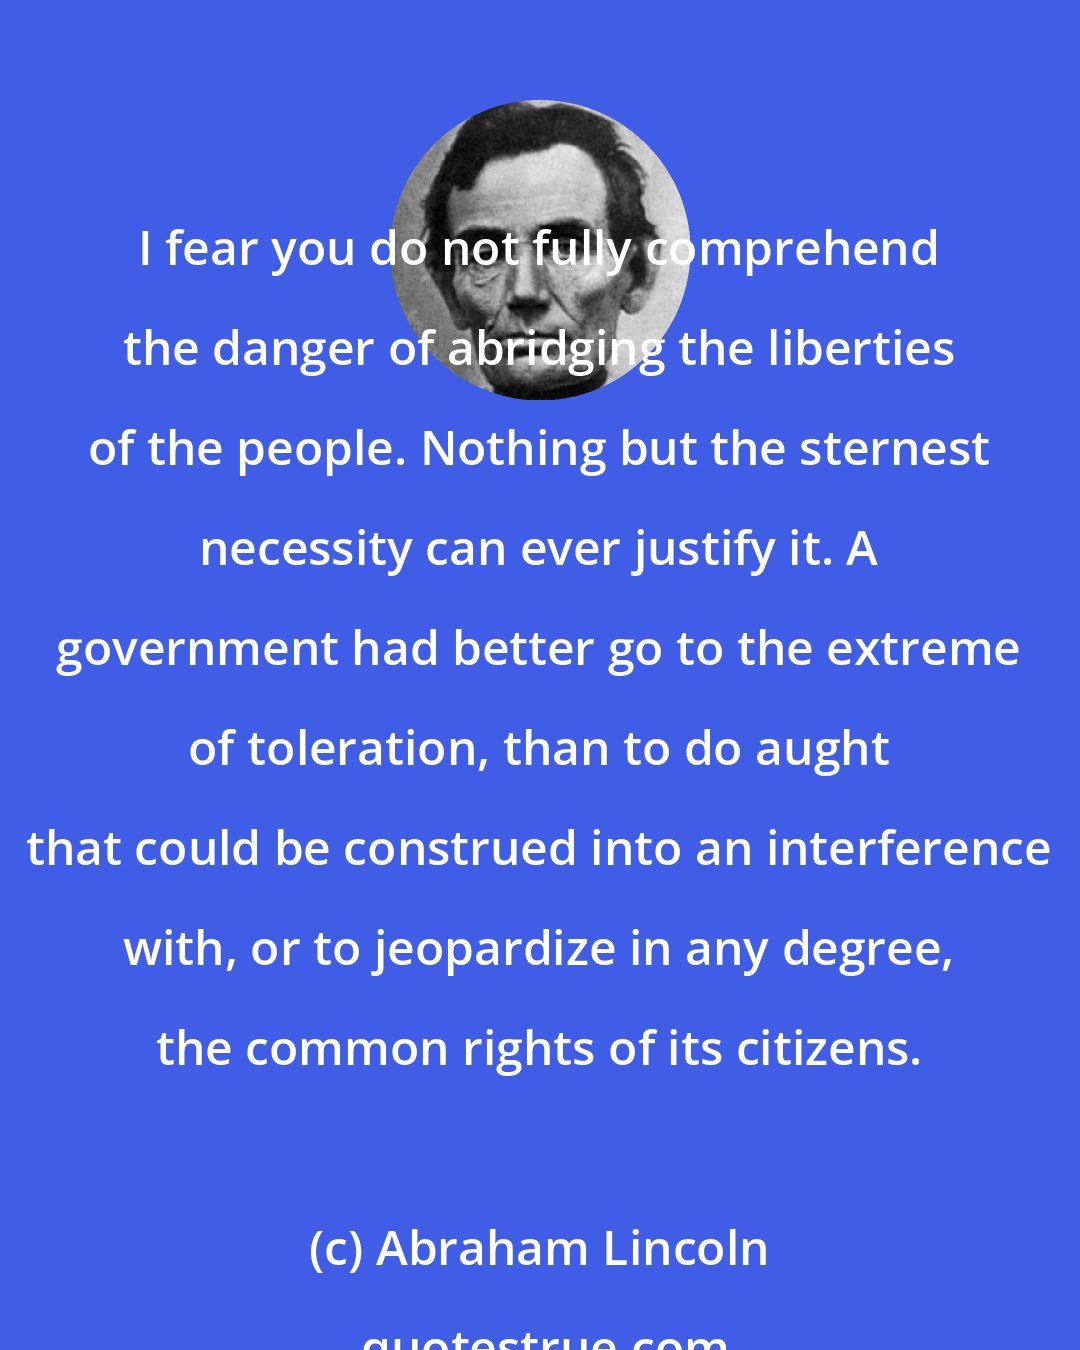 Abraham Lincoln: I fear you do not fully comprehend the danger of abridging the liberties of the people. Nothing but the sternest necessity can ever justify it. A government had better go to the extreme of toleration, than to do aught that could be construed into an interference with, or to jeopardize in any degree, the common rights of its citizens.